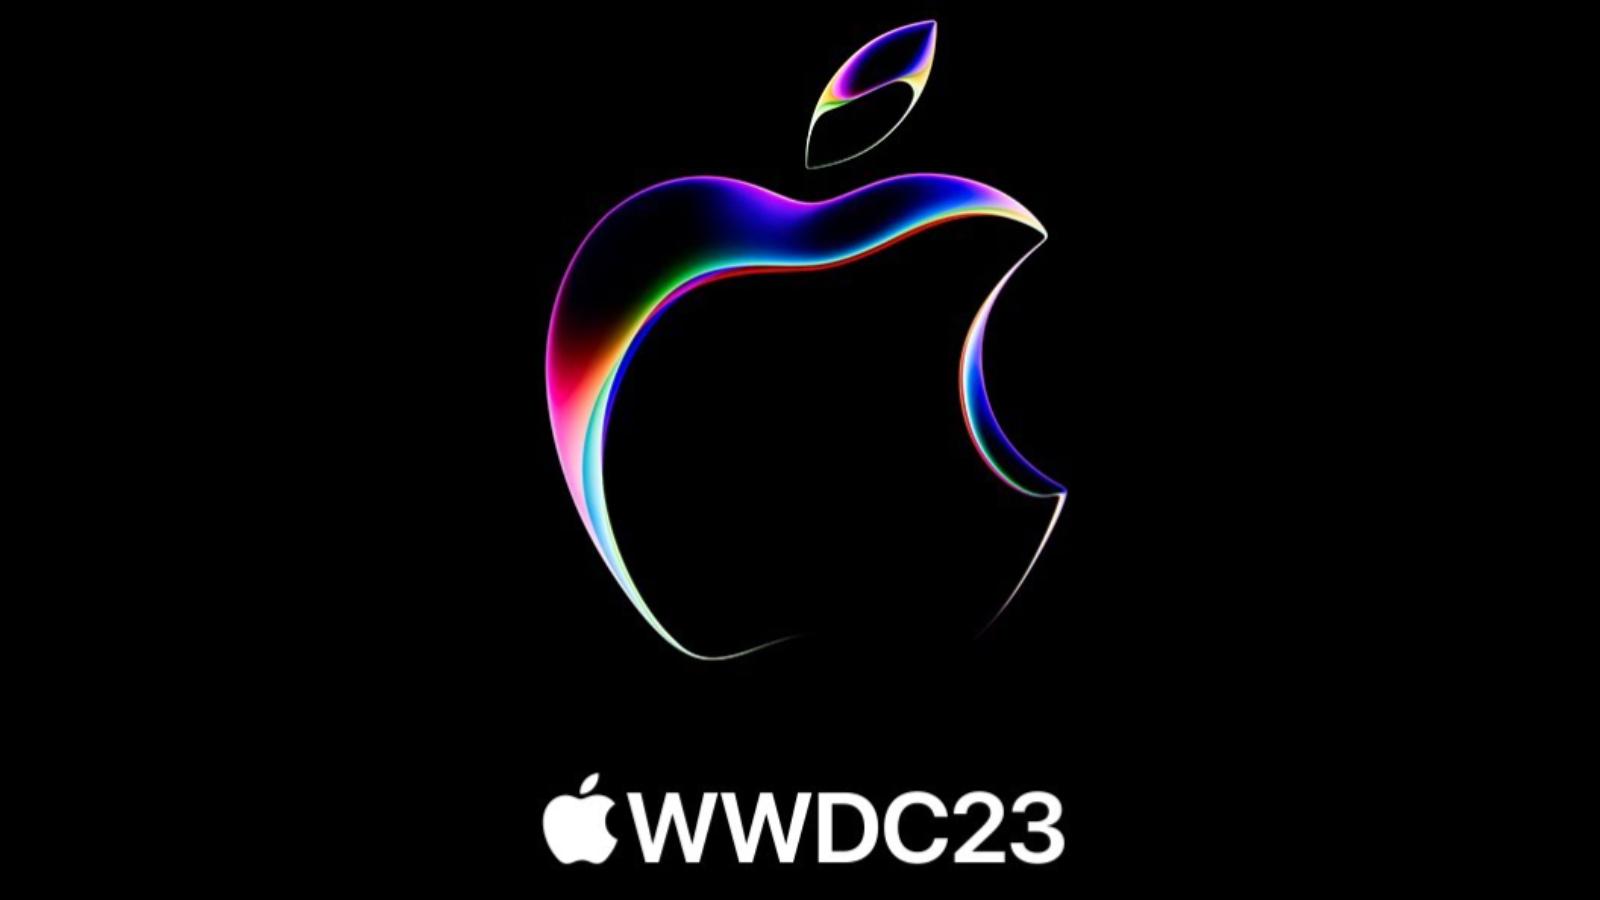 apple wwdc products revealed during showcase